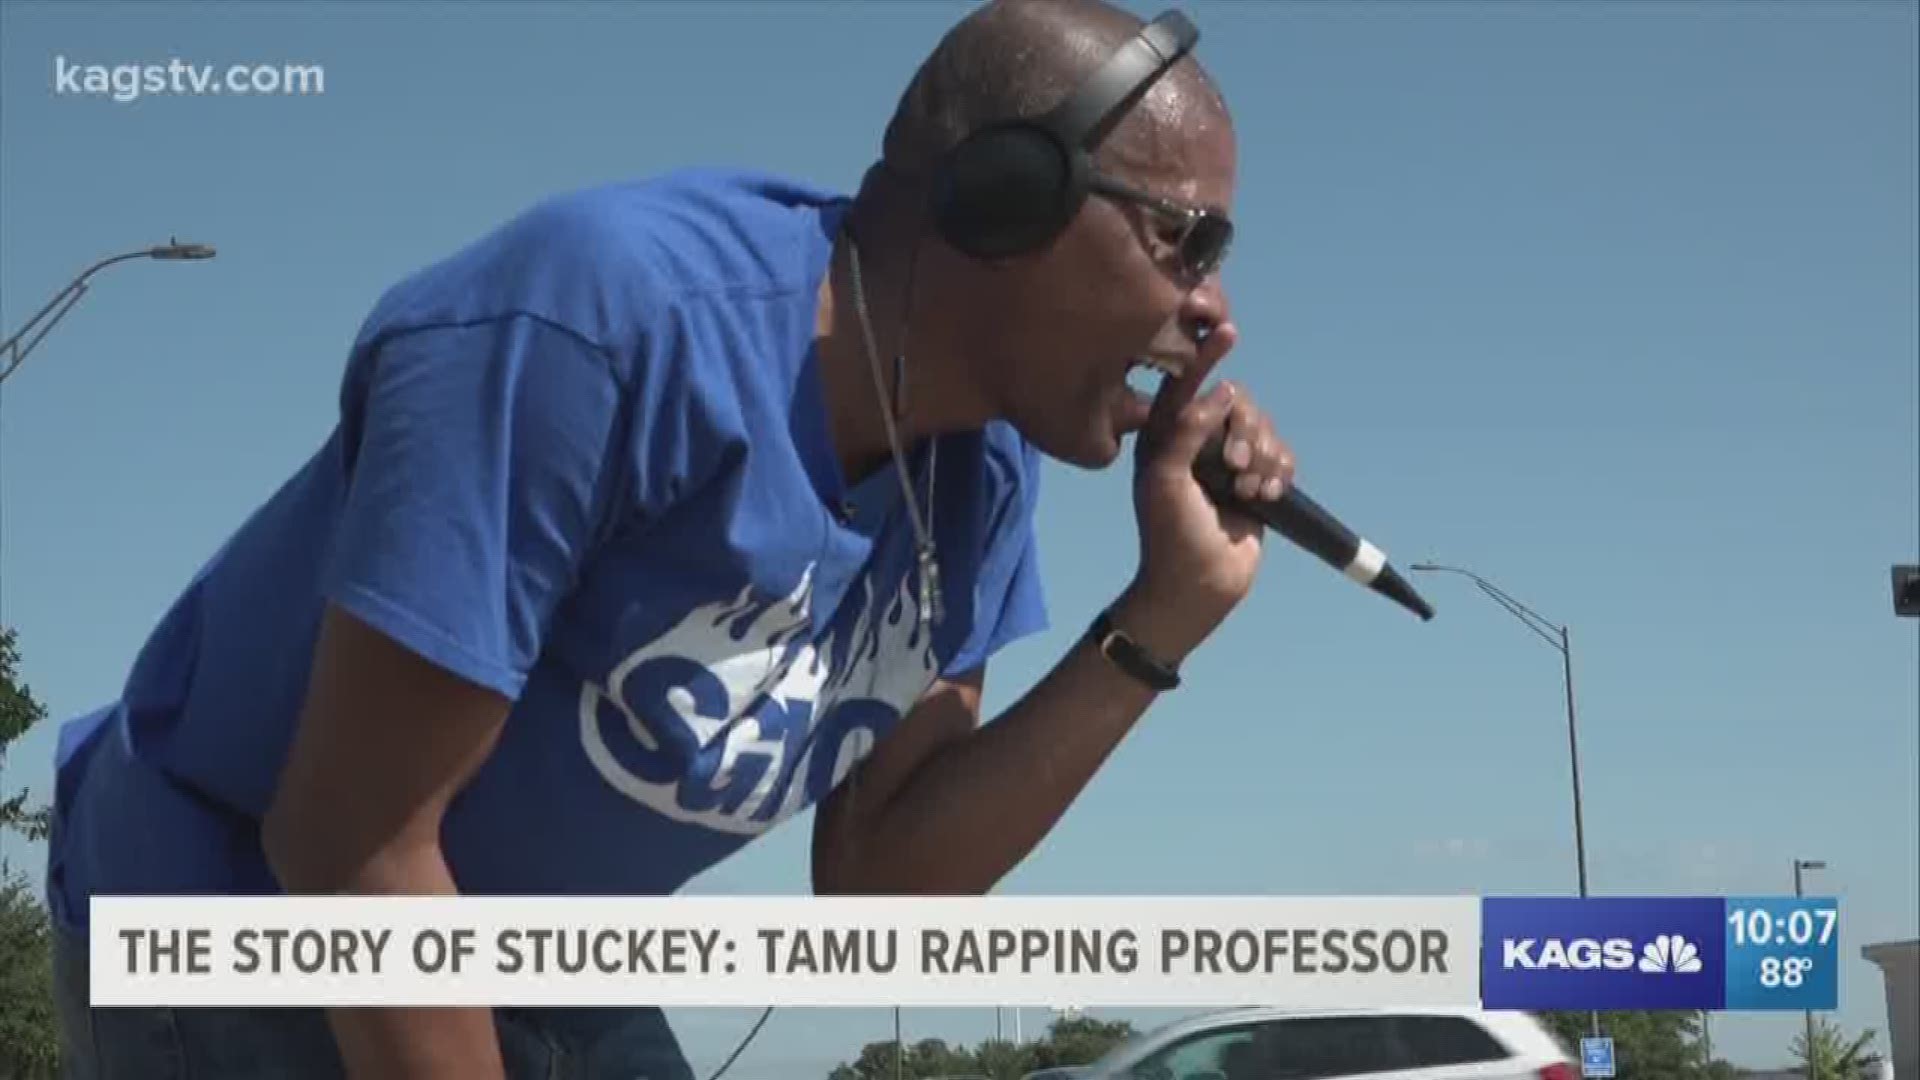 You may have seen him rapping on a local street corner. See his story.